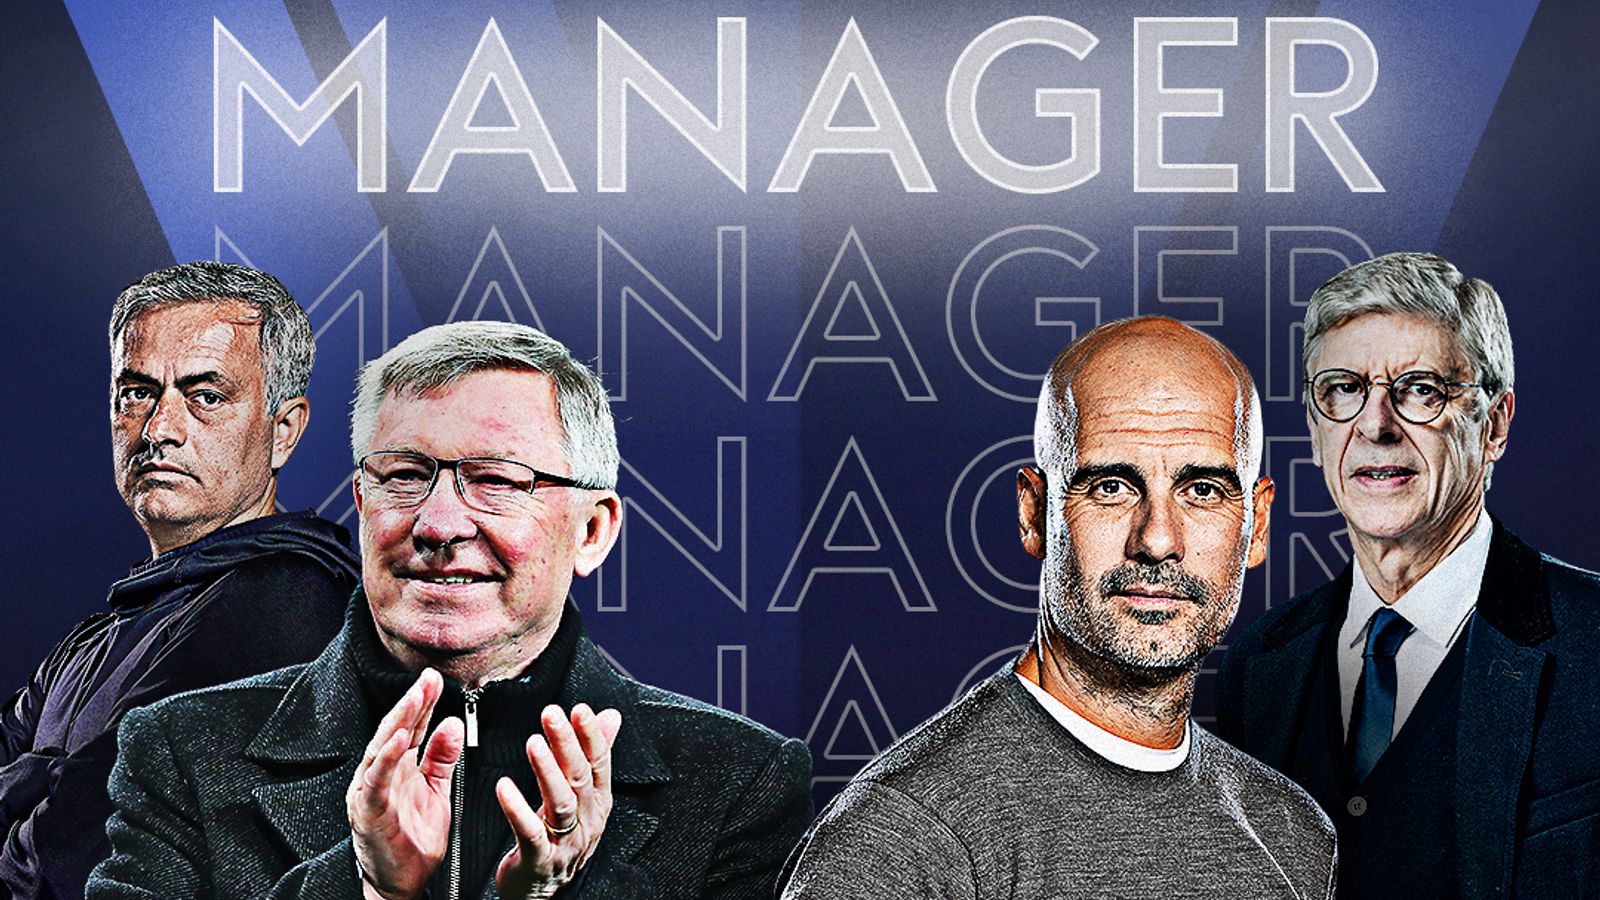 Greatest Premier League manager who deserves the title? Football